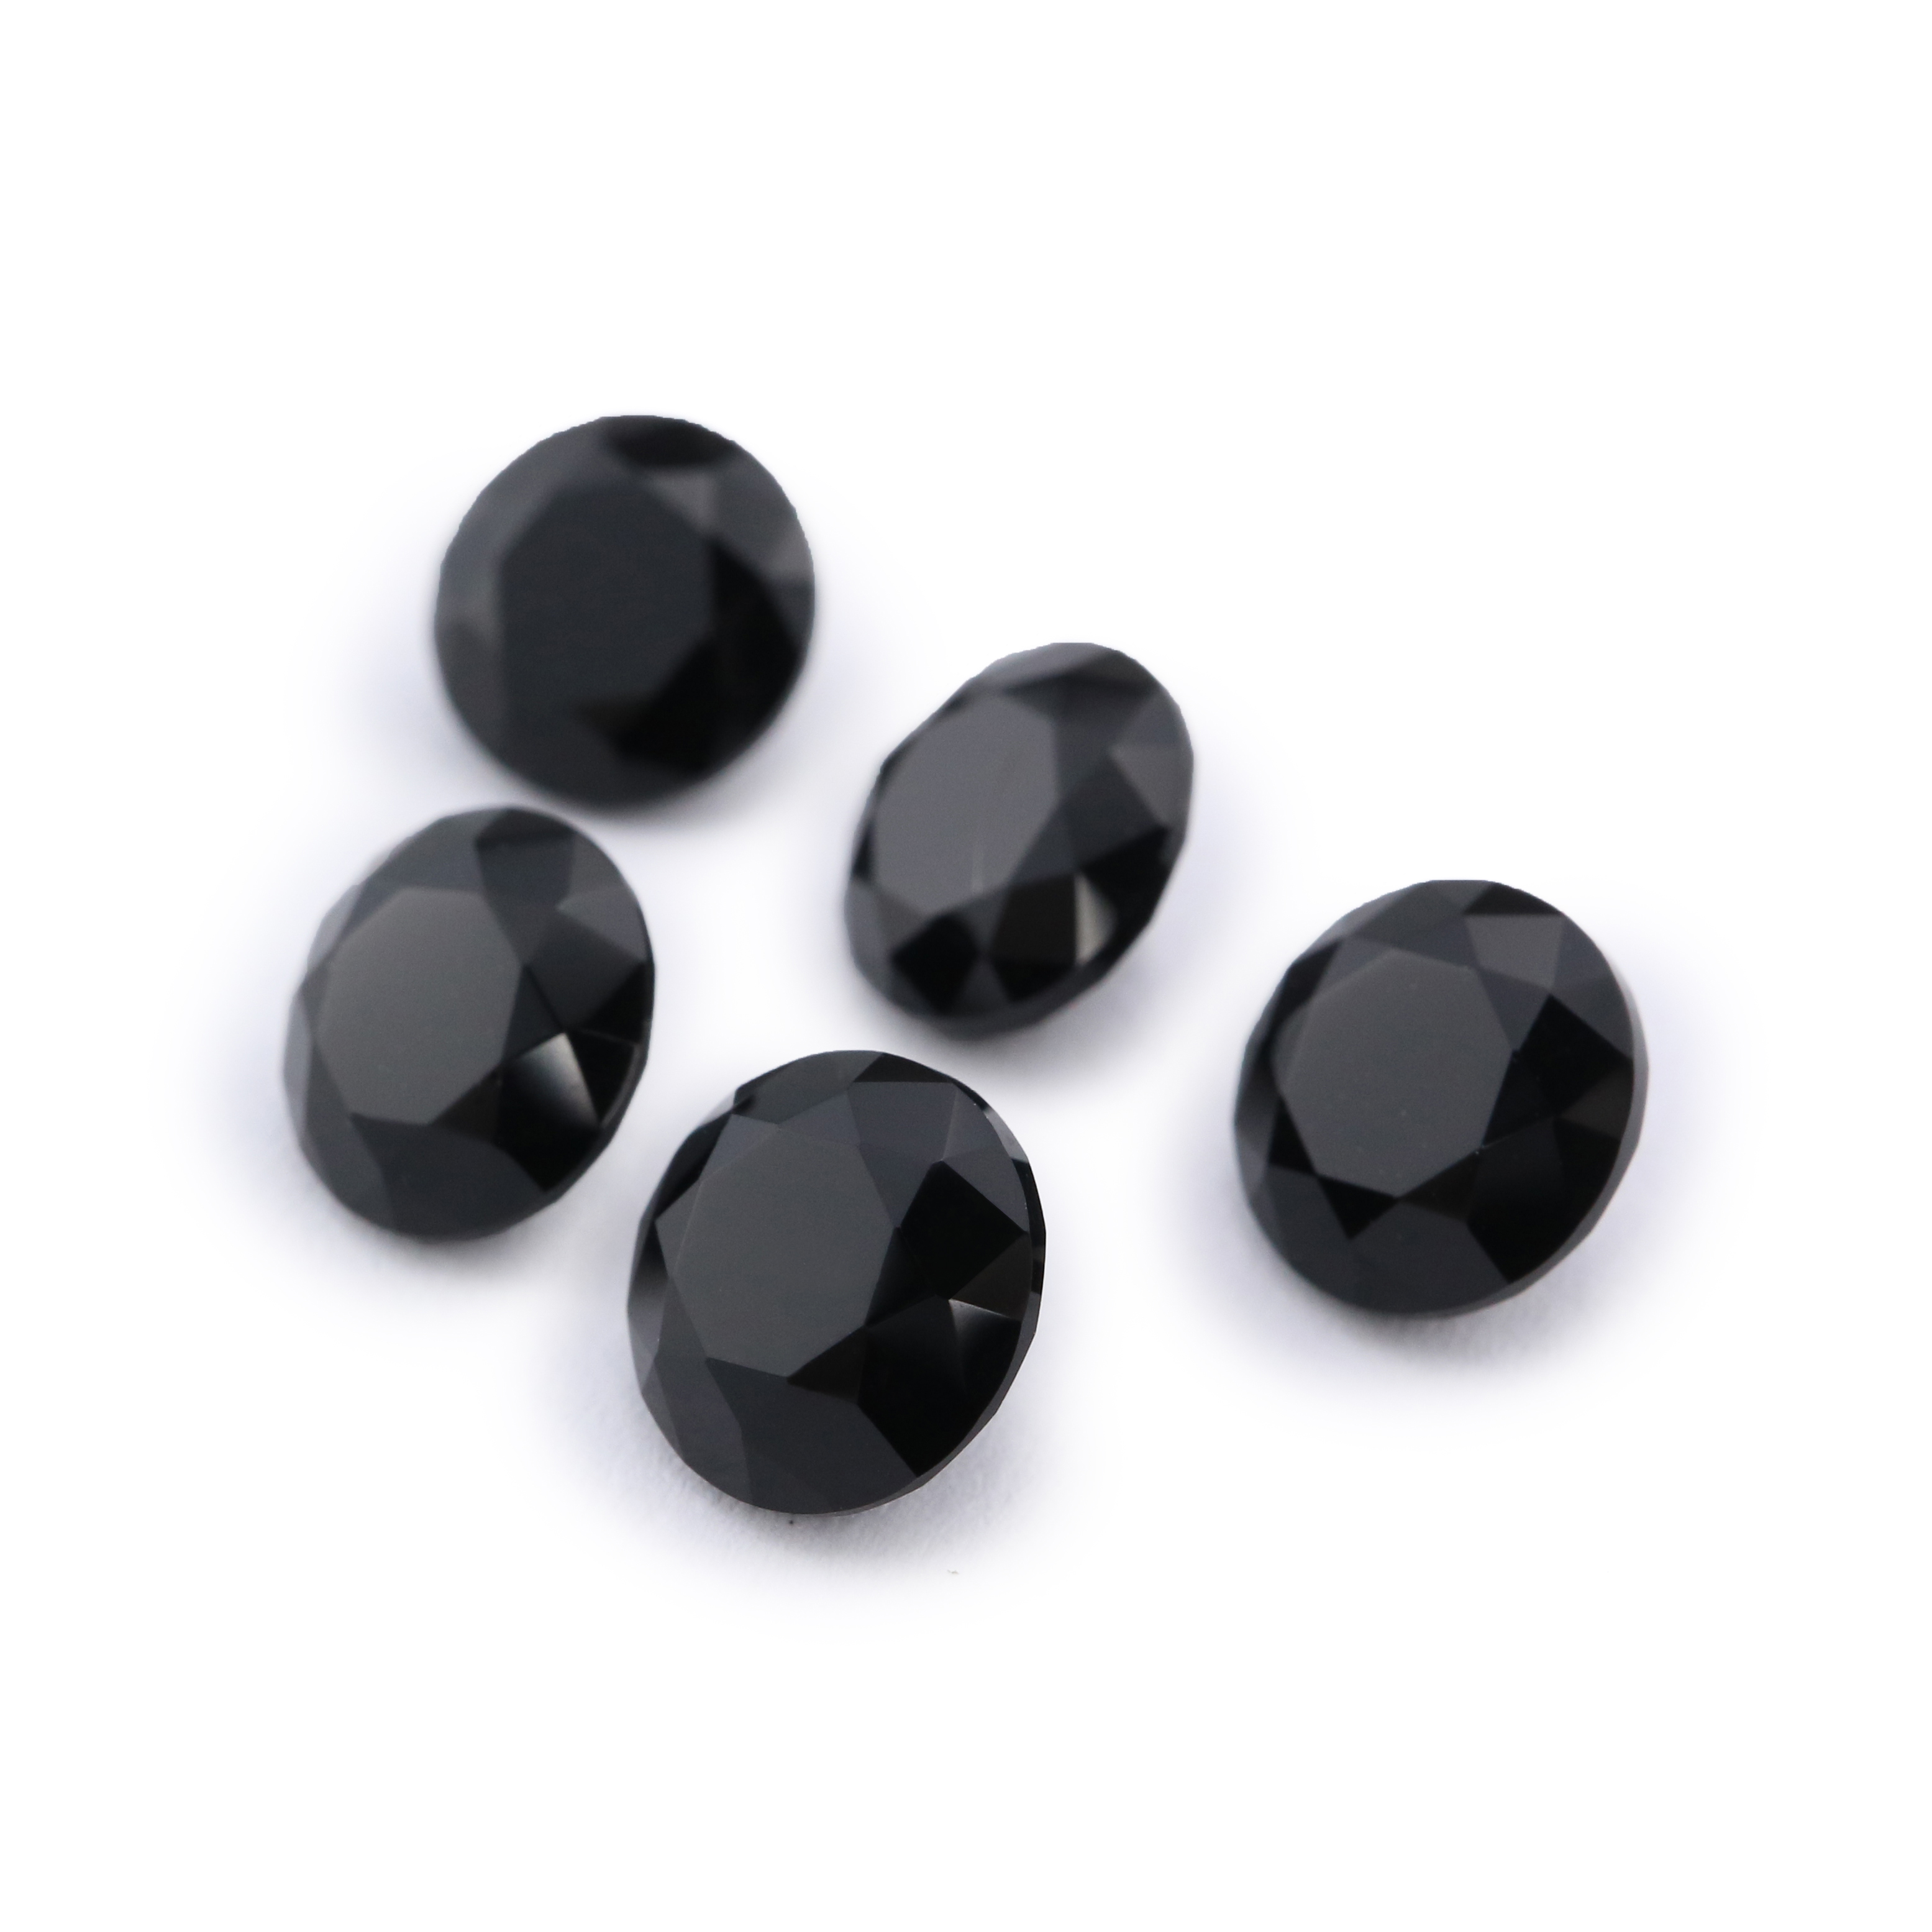 1Pcs Natural Round Black Onyx Faceted Cut Loose Gemstone Nature Semi Precious Stone DIY Jewelry Supplies 4110170 - Click Image to Close